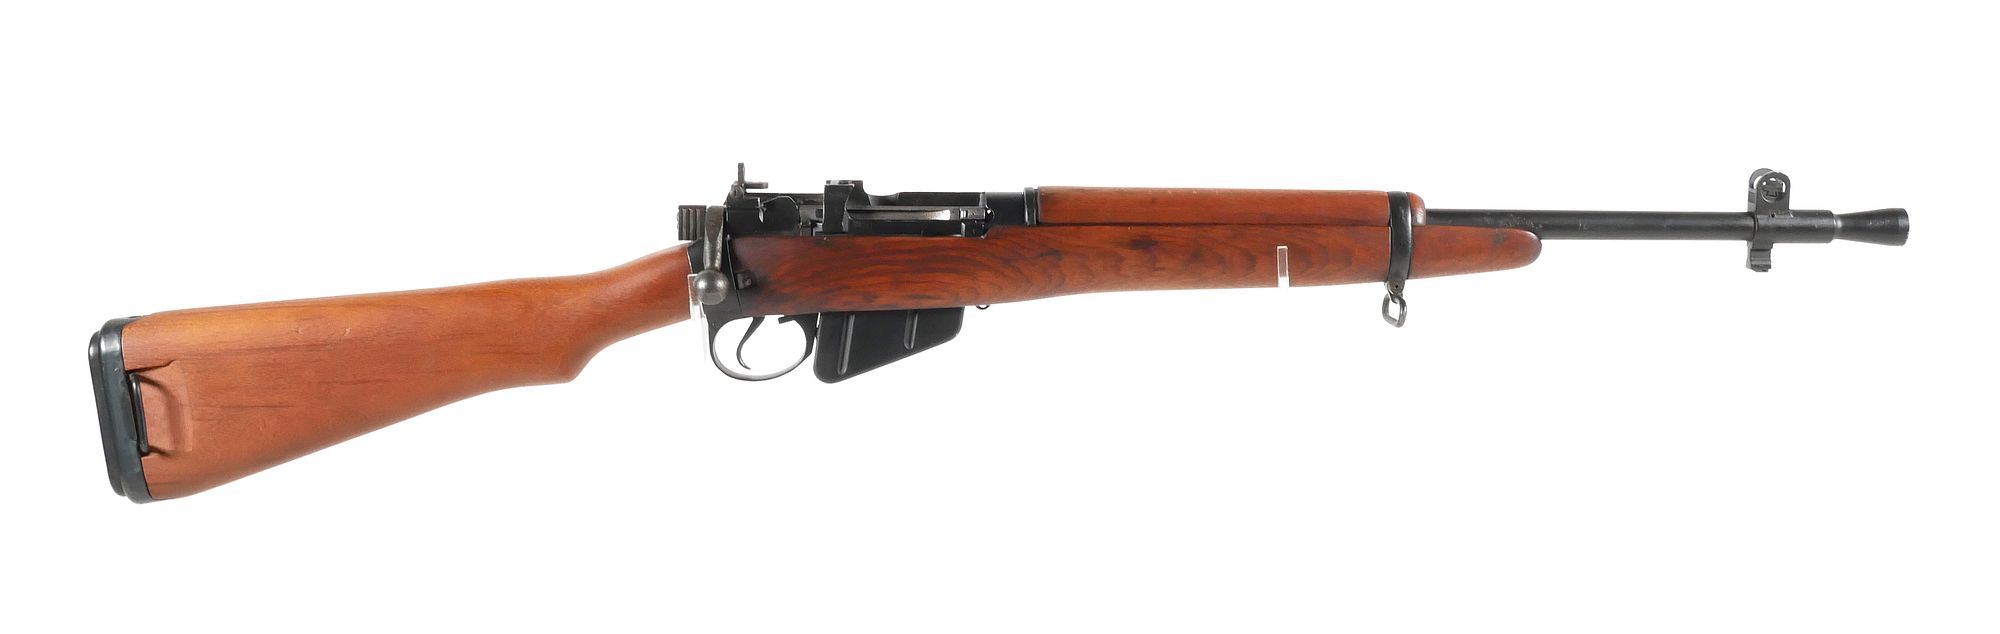 British LEE-ENFIELD No4 Mk 1 Sporterized 303 sold at auction on 17th June